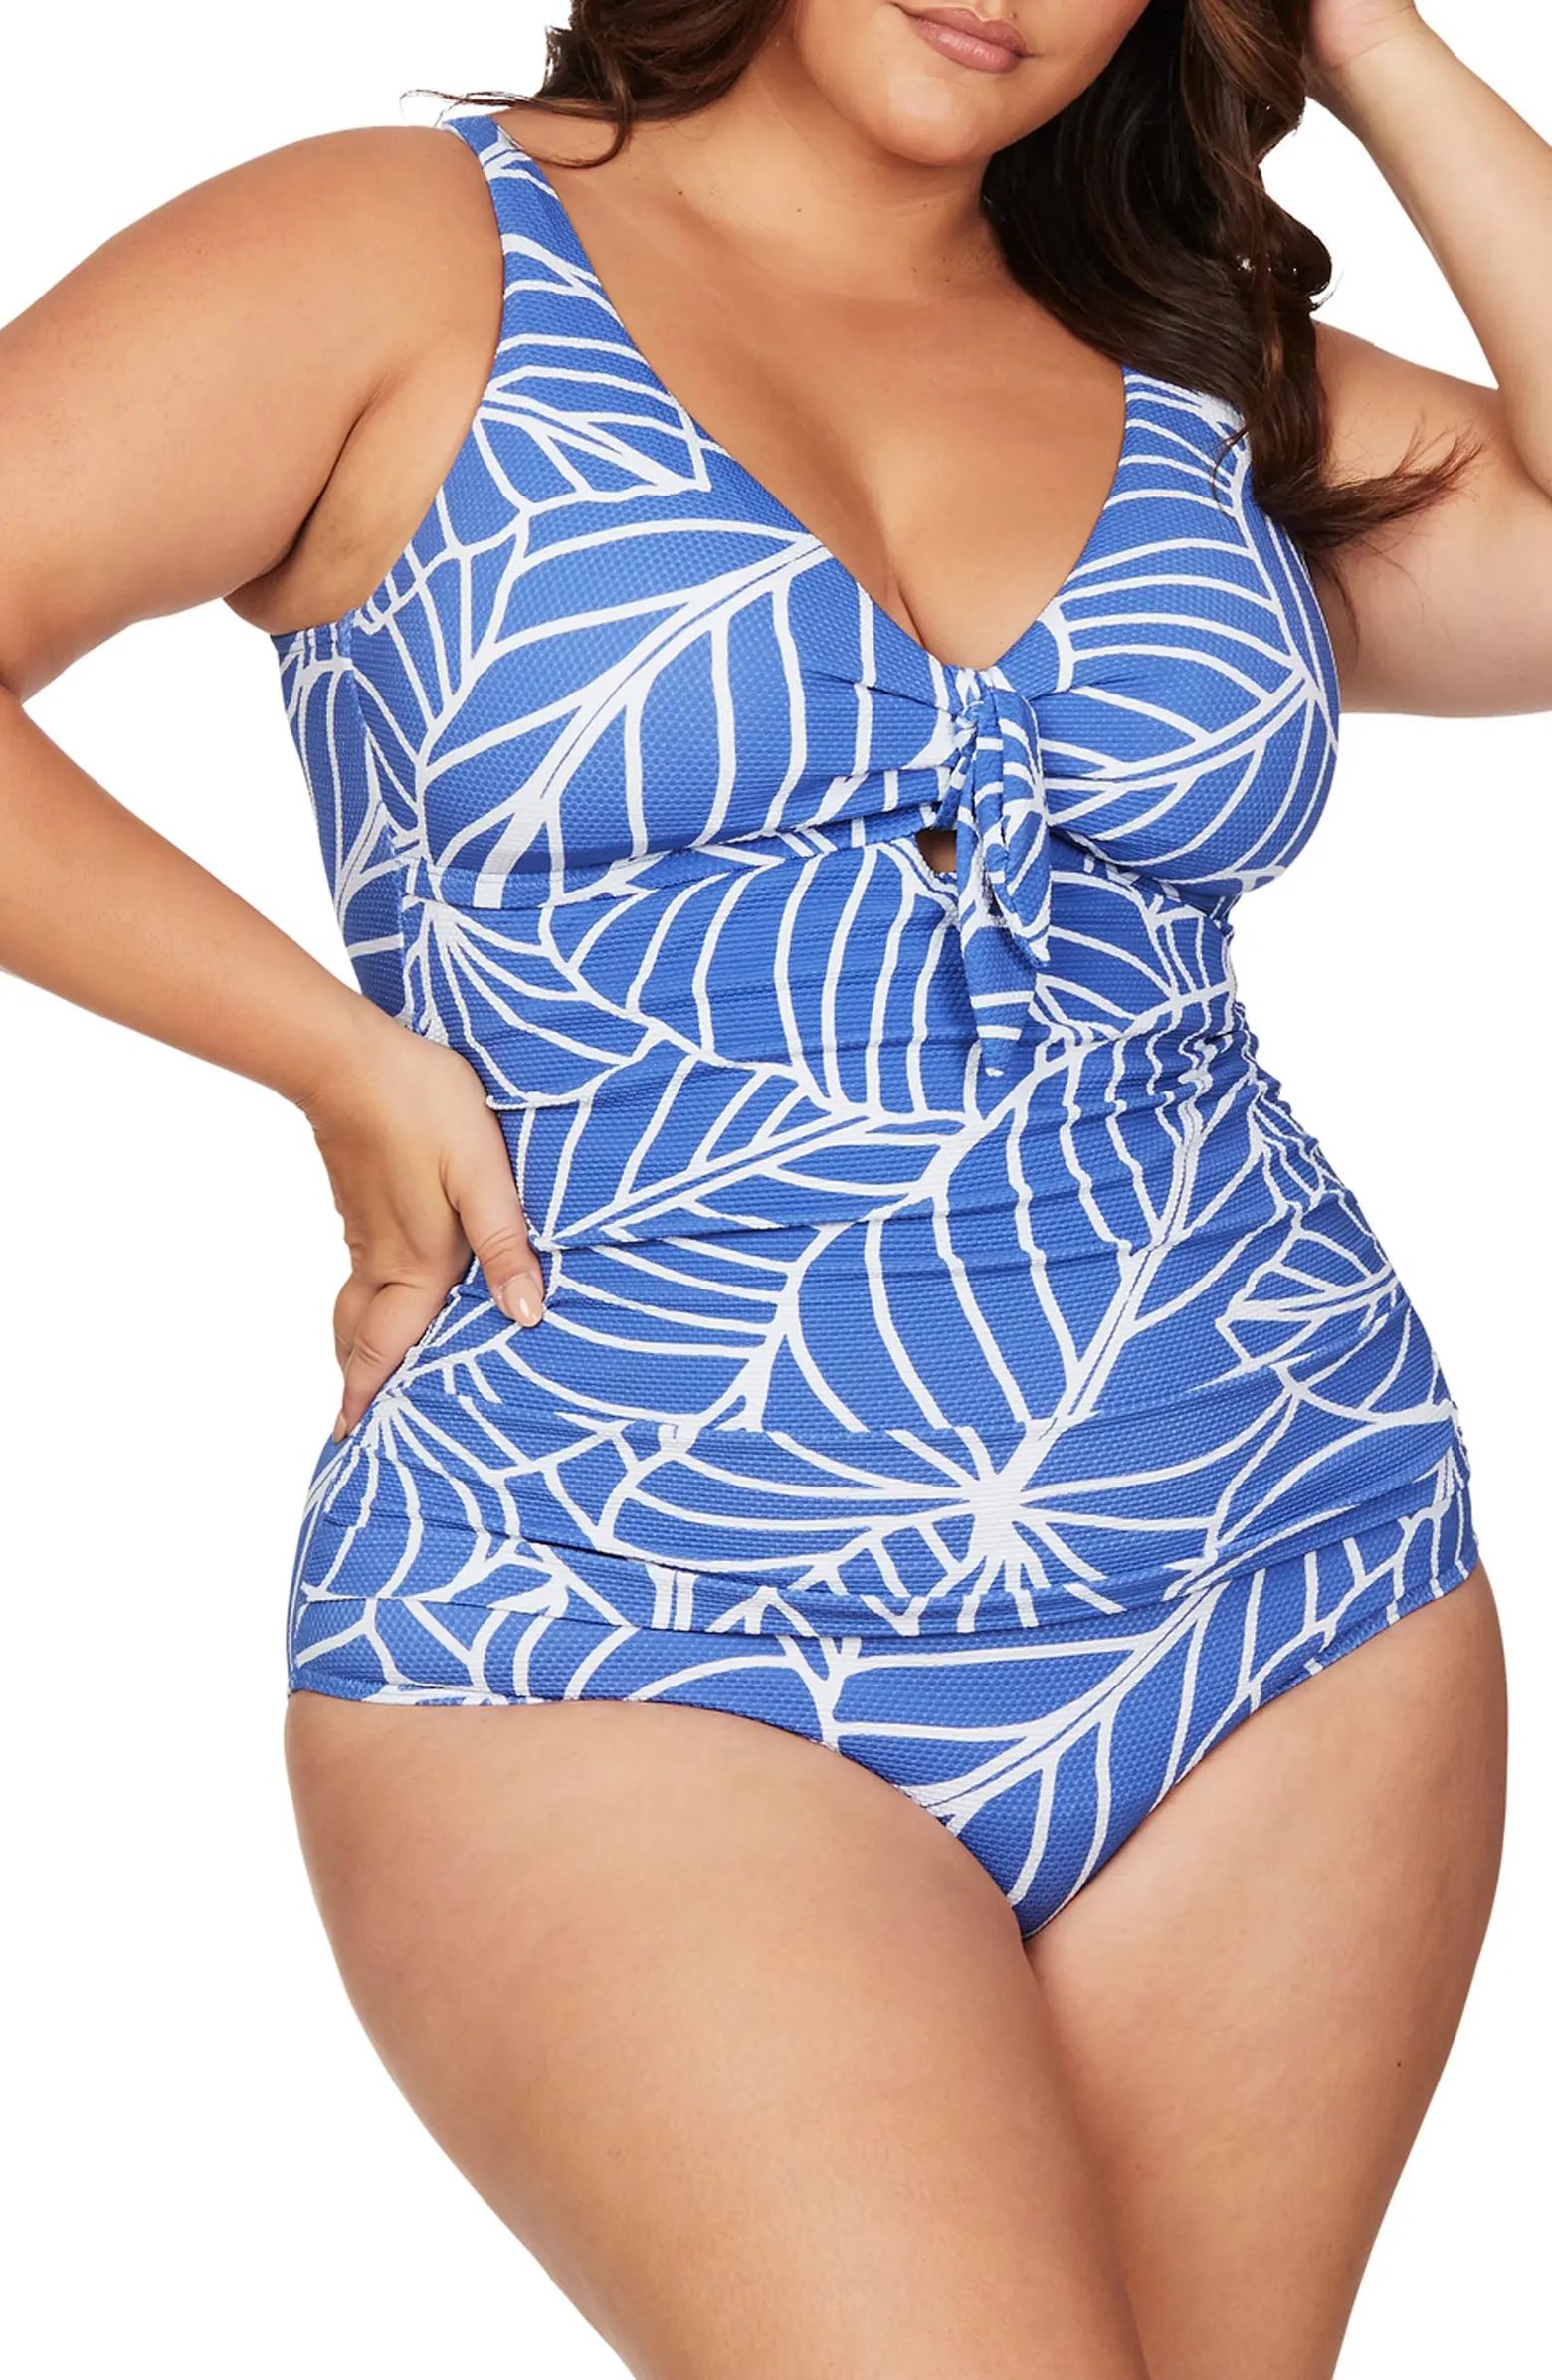 Artesands Philharmonic Chagall One-Piece Swimsuit | Nordstrom | Nordstrom